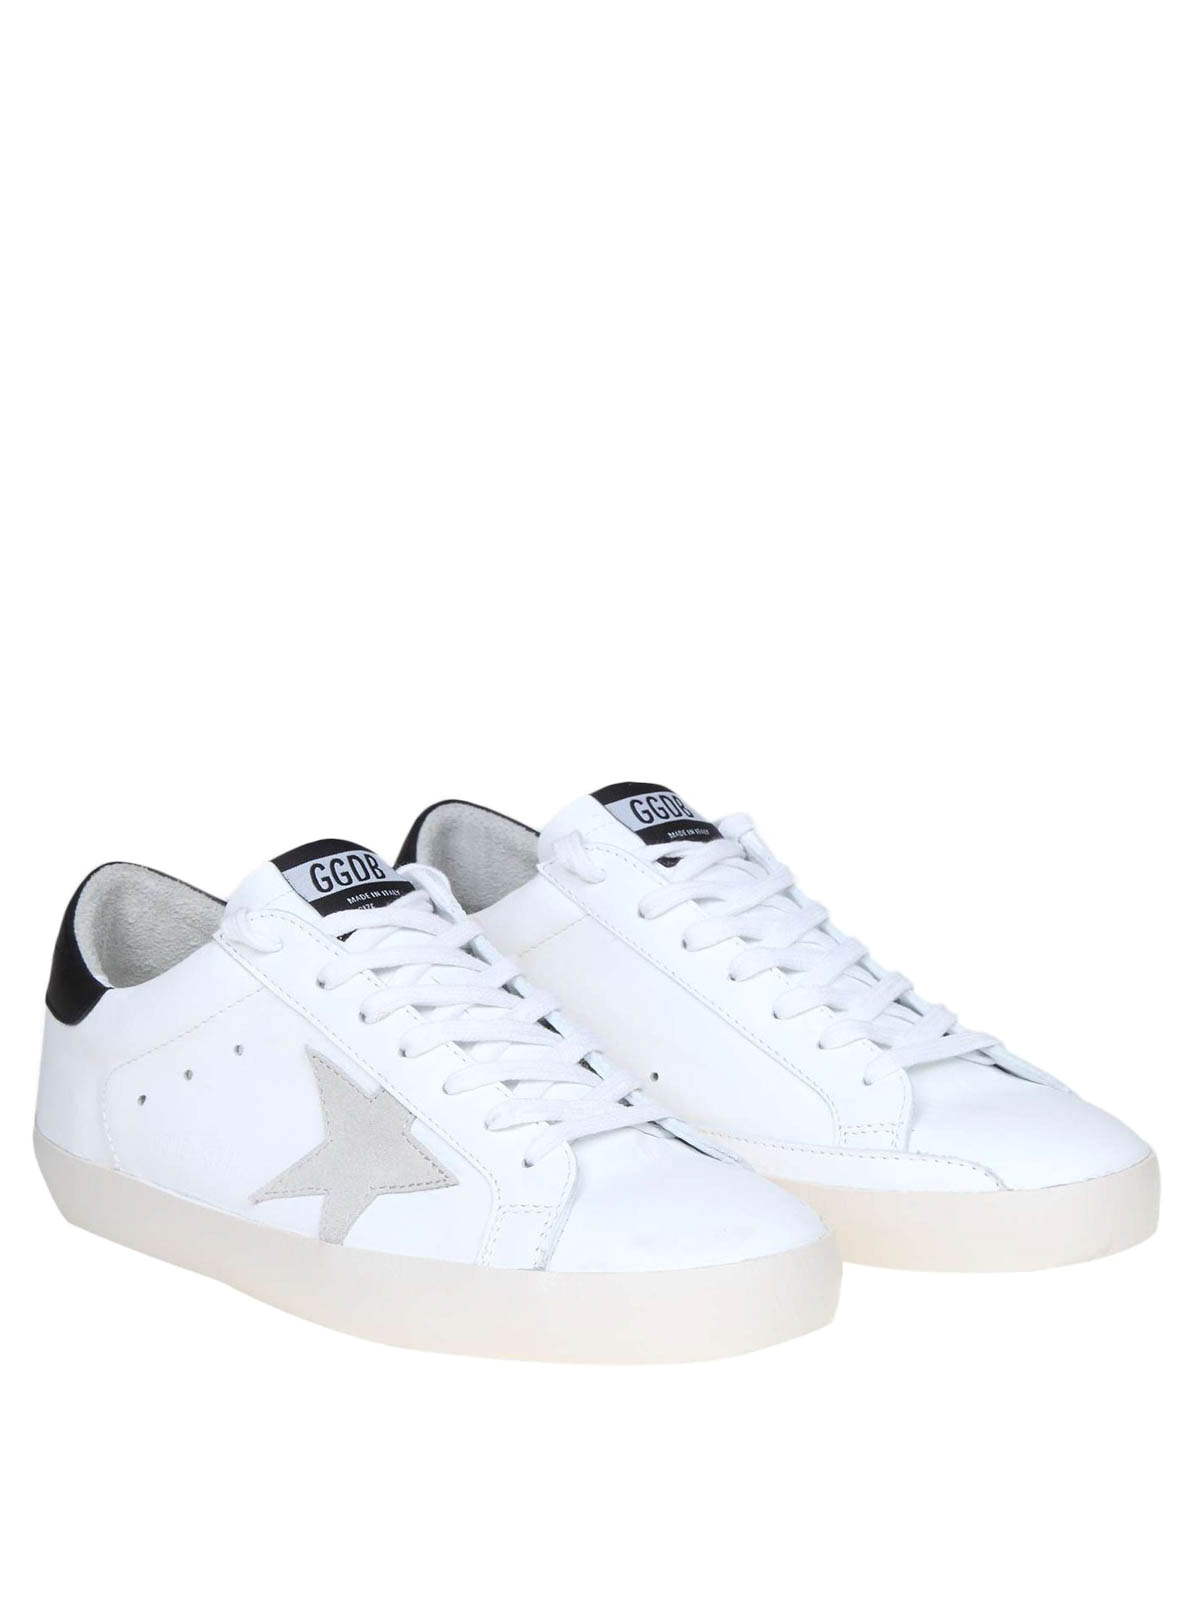 Trainers Golden Goose - Superstar white low-top - G35MS590E73